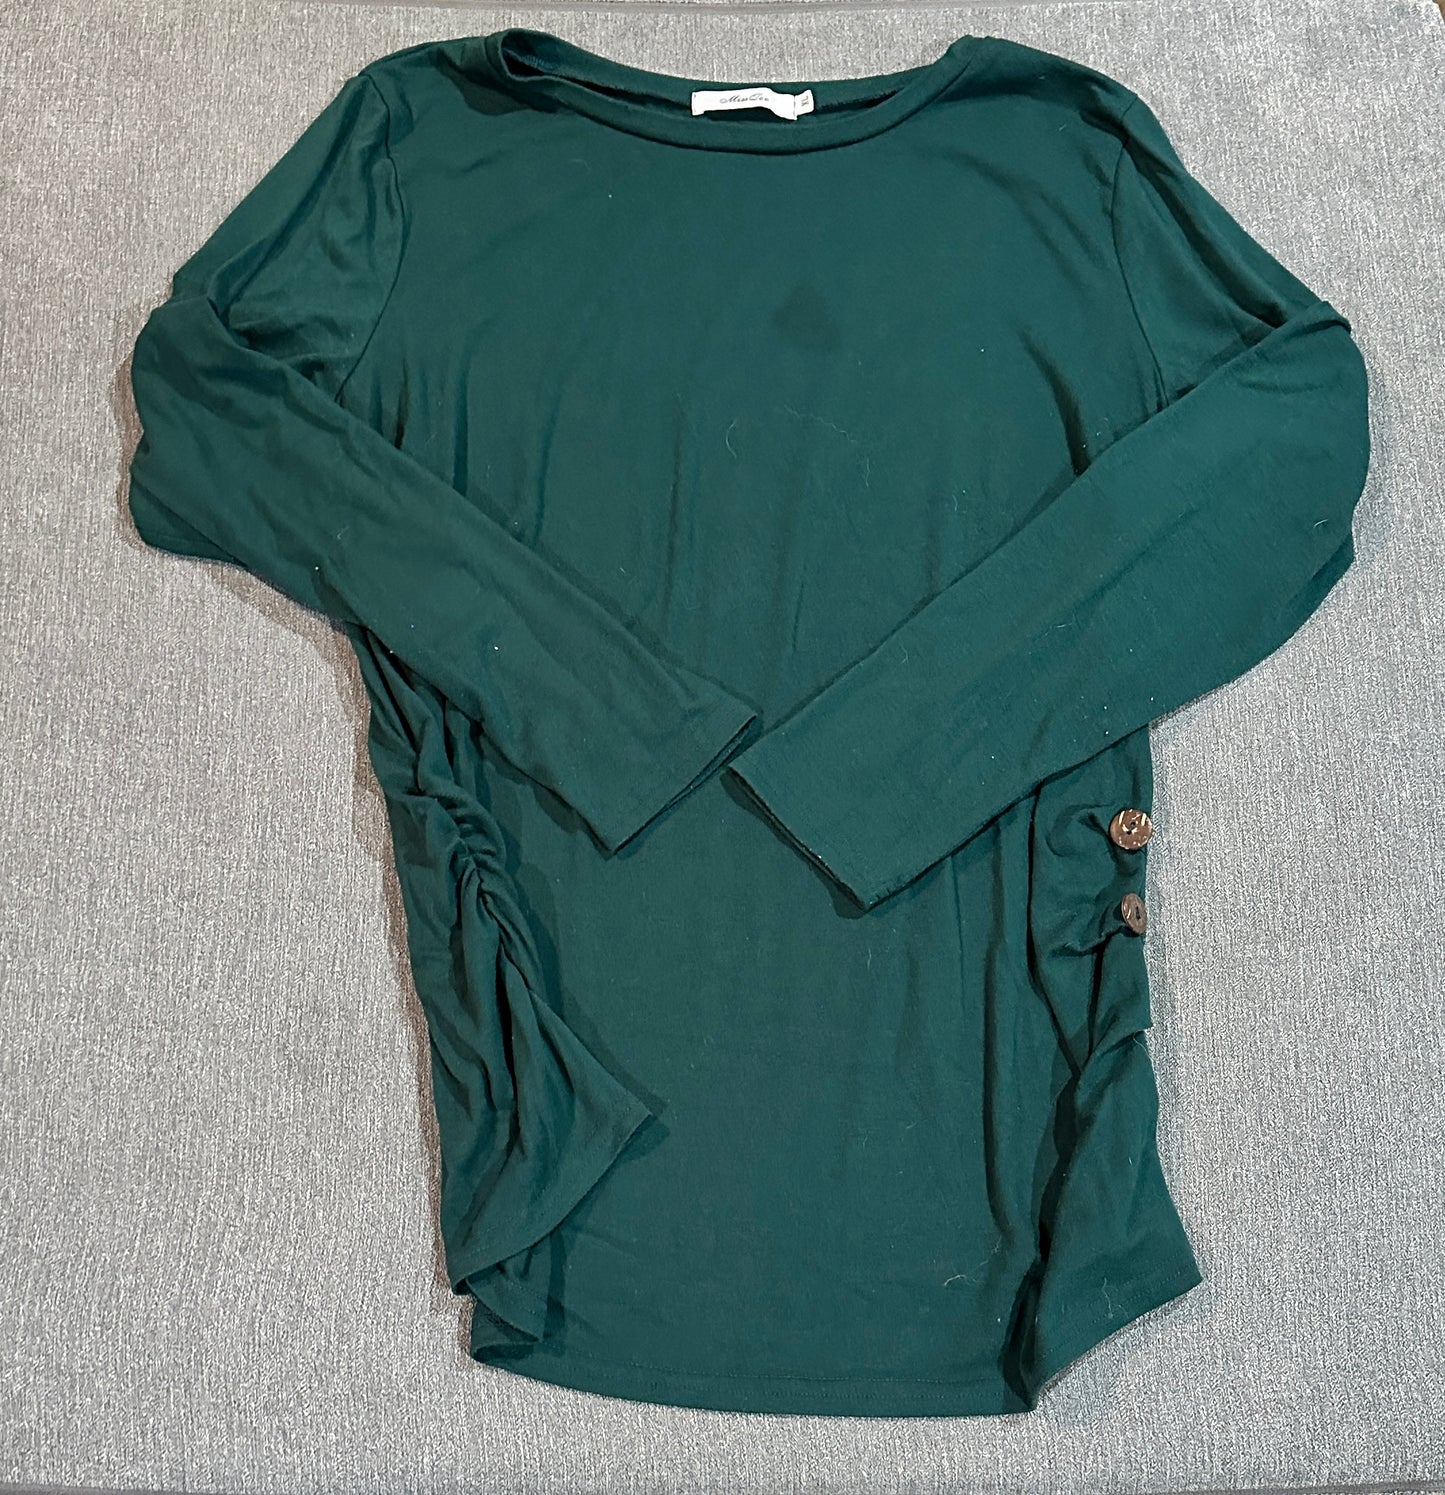 XL teal maternity sweater